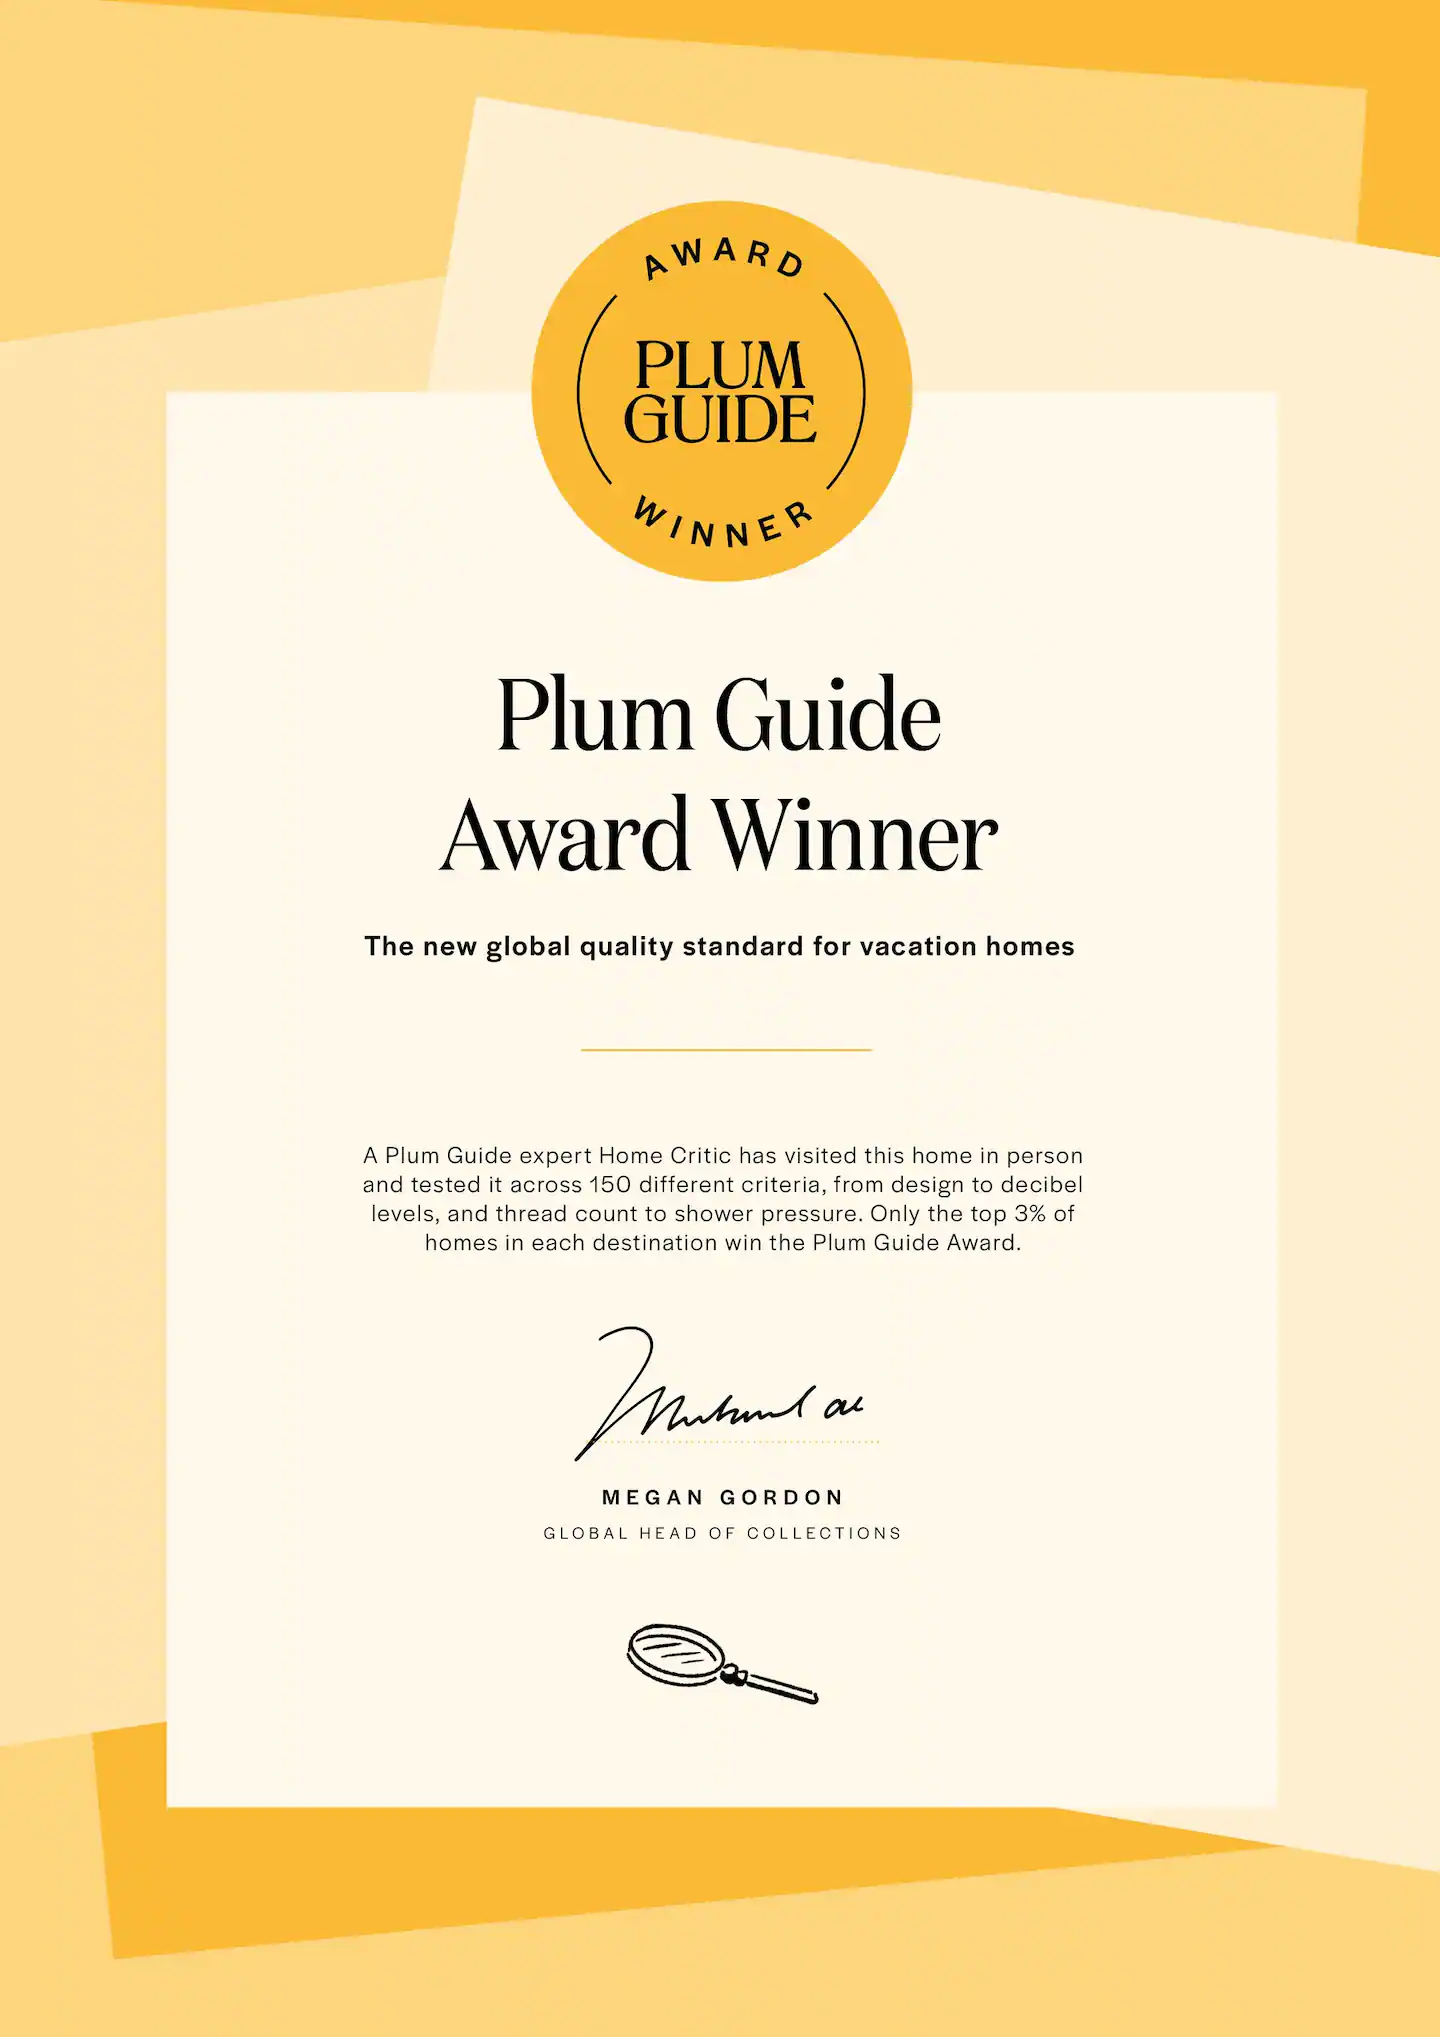 The apartment is part of "The Plum Guide" Official Selection.